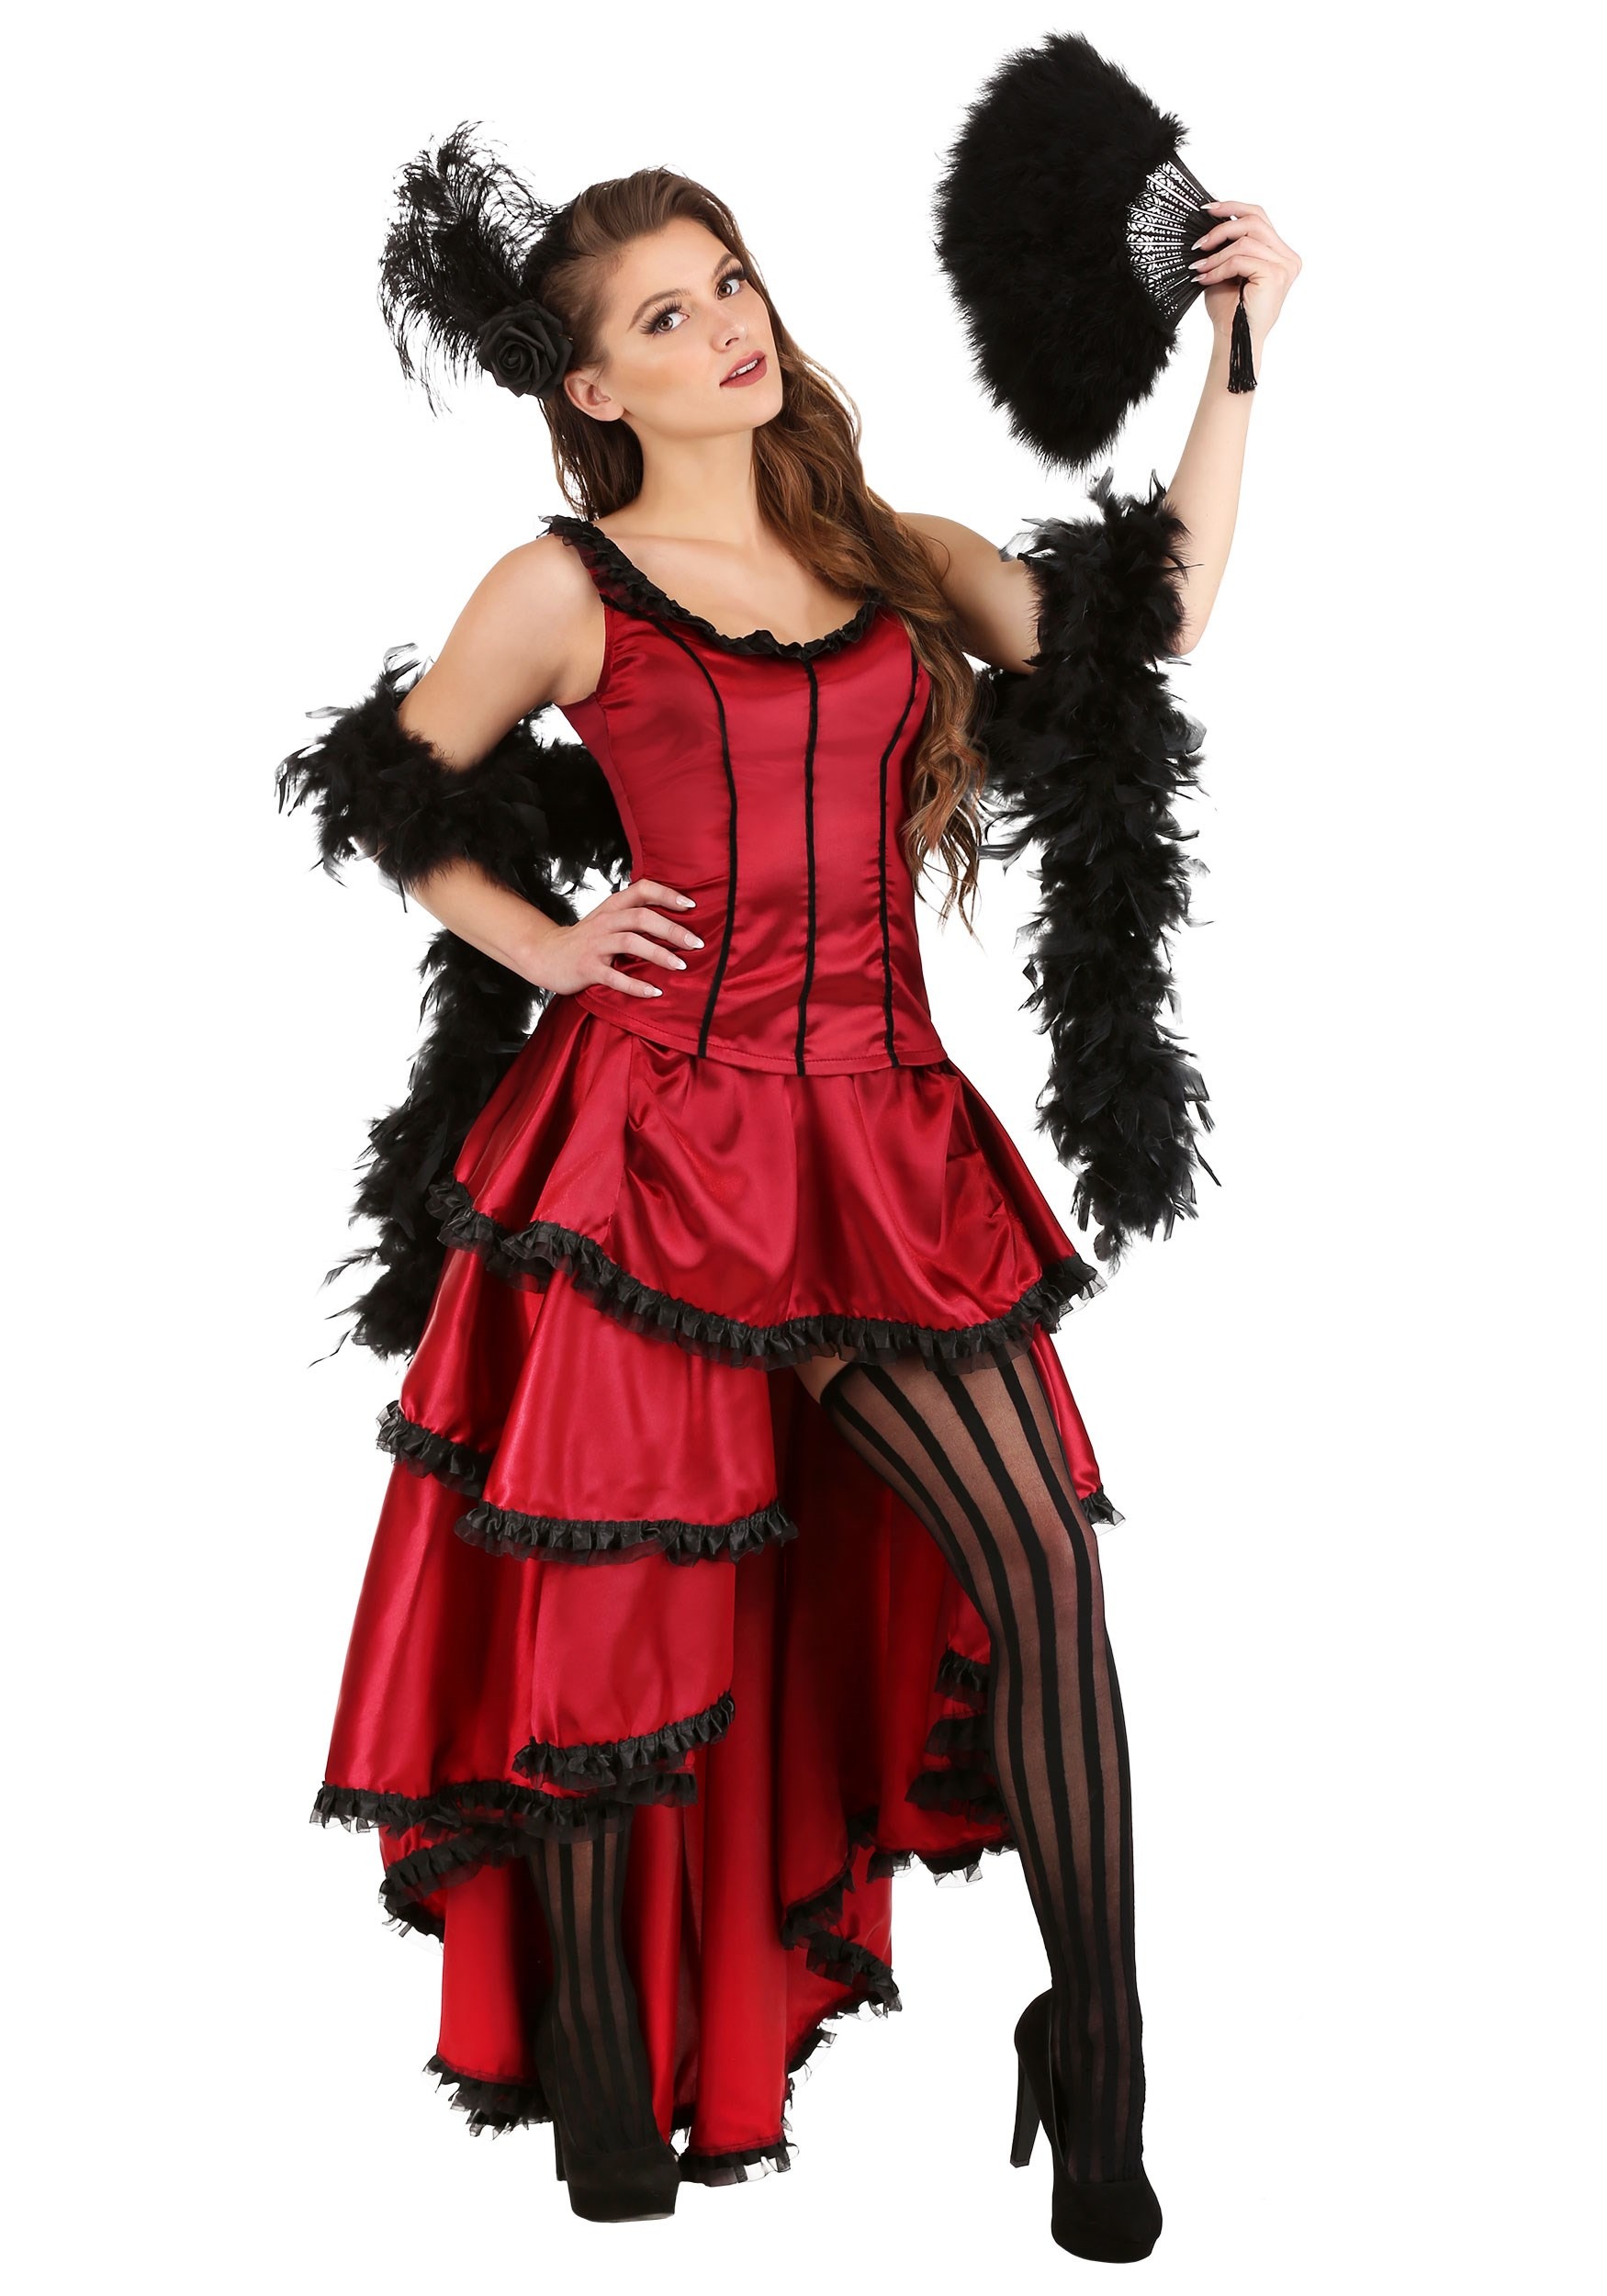 https://images.fun.com/products/46114/1-1/womens-sultry-saloon-girl-costume.jpg